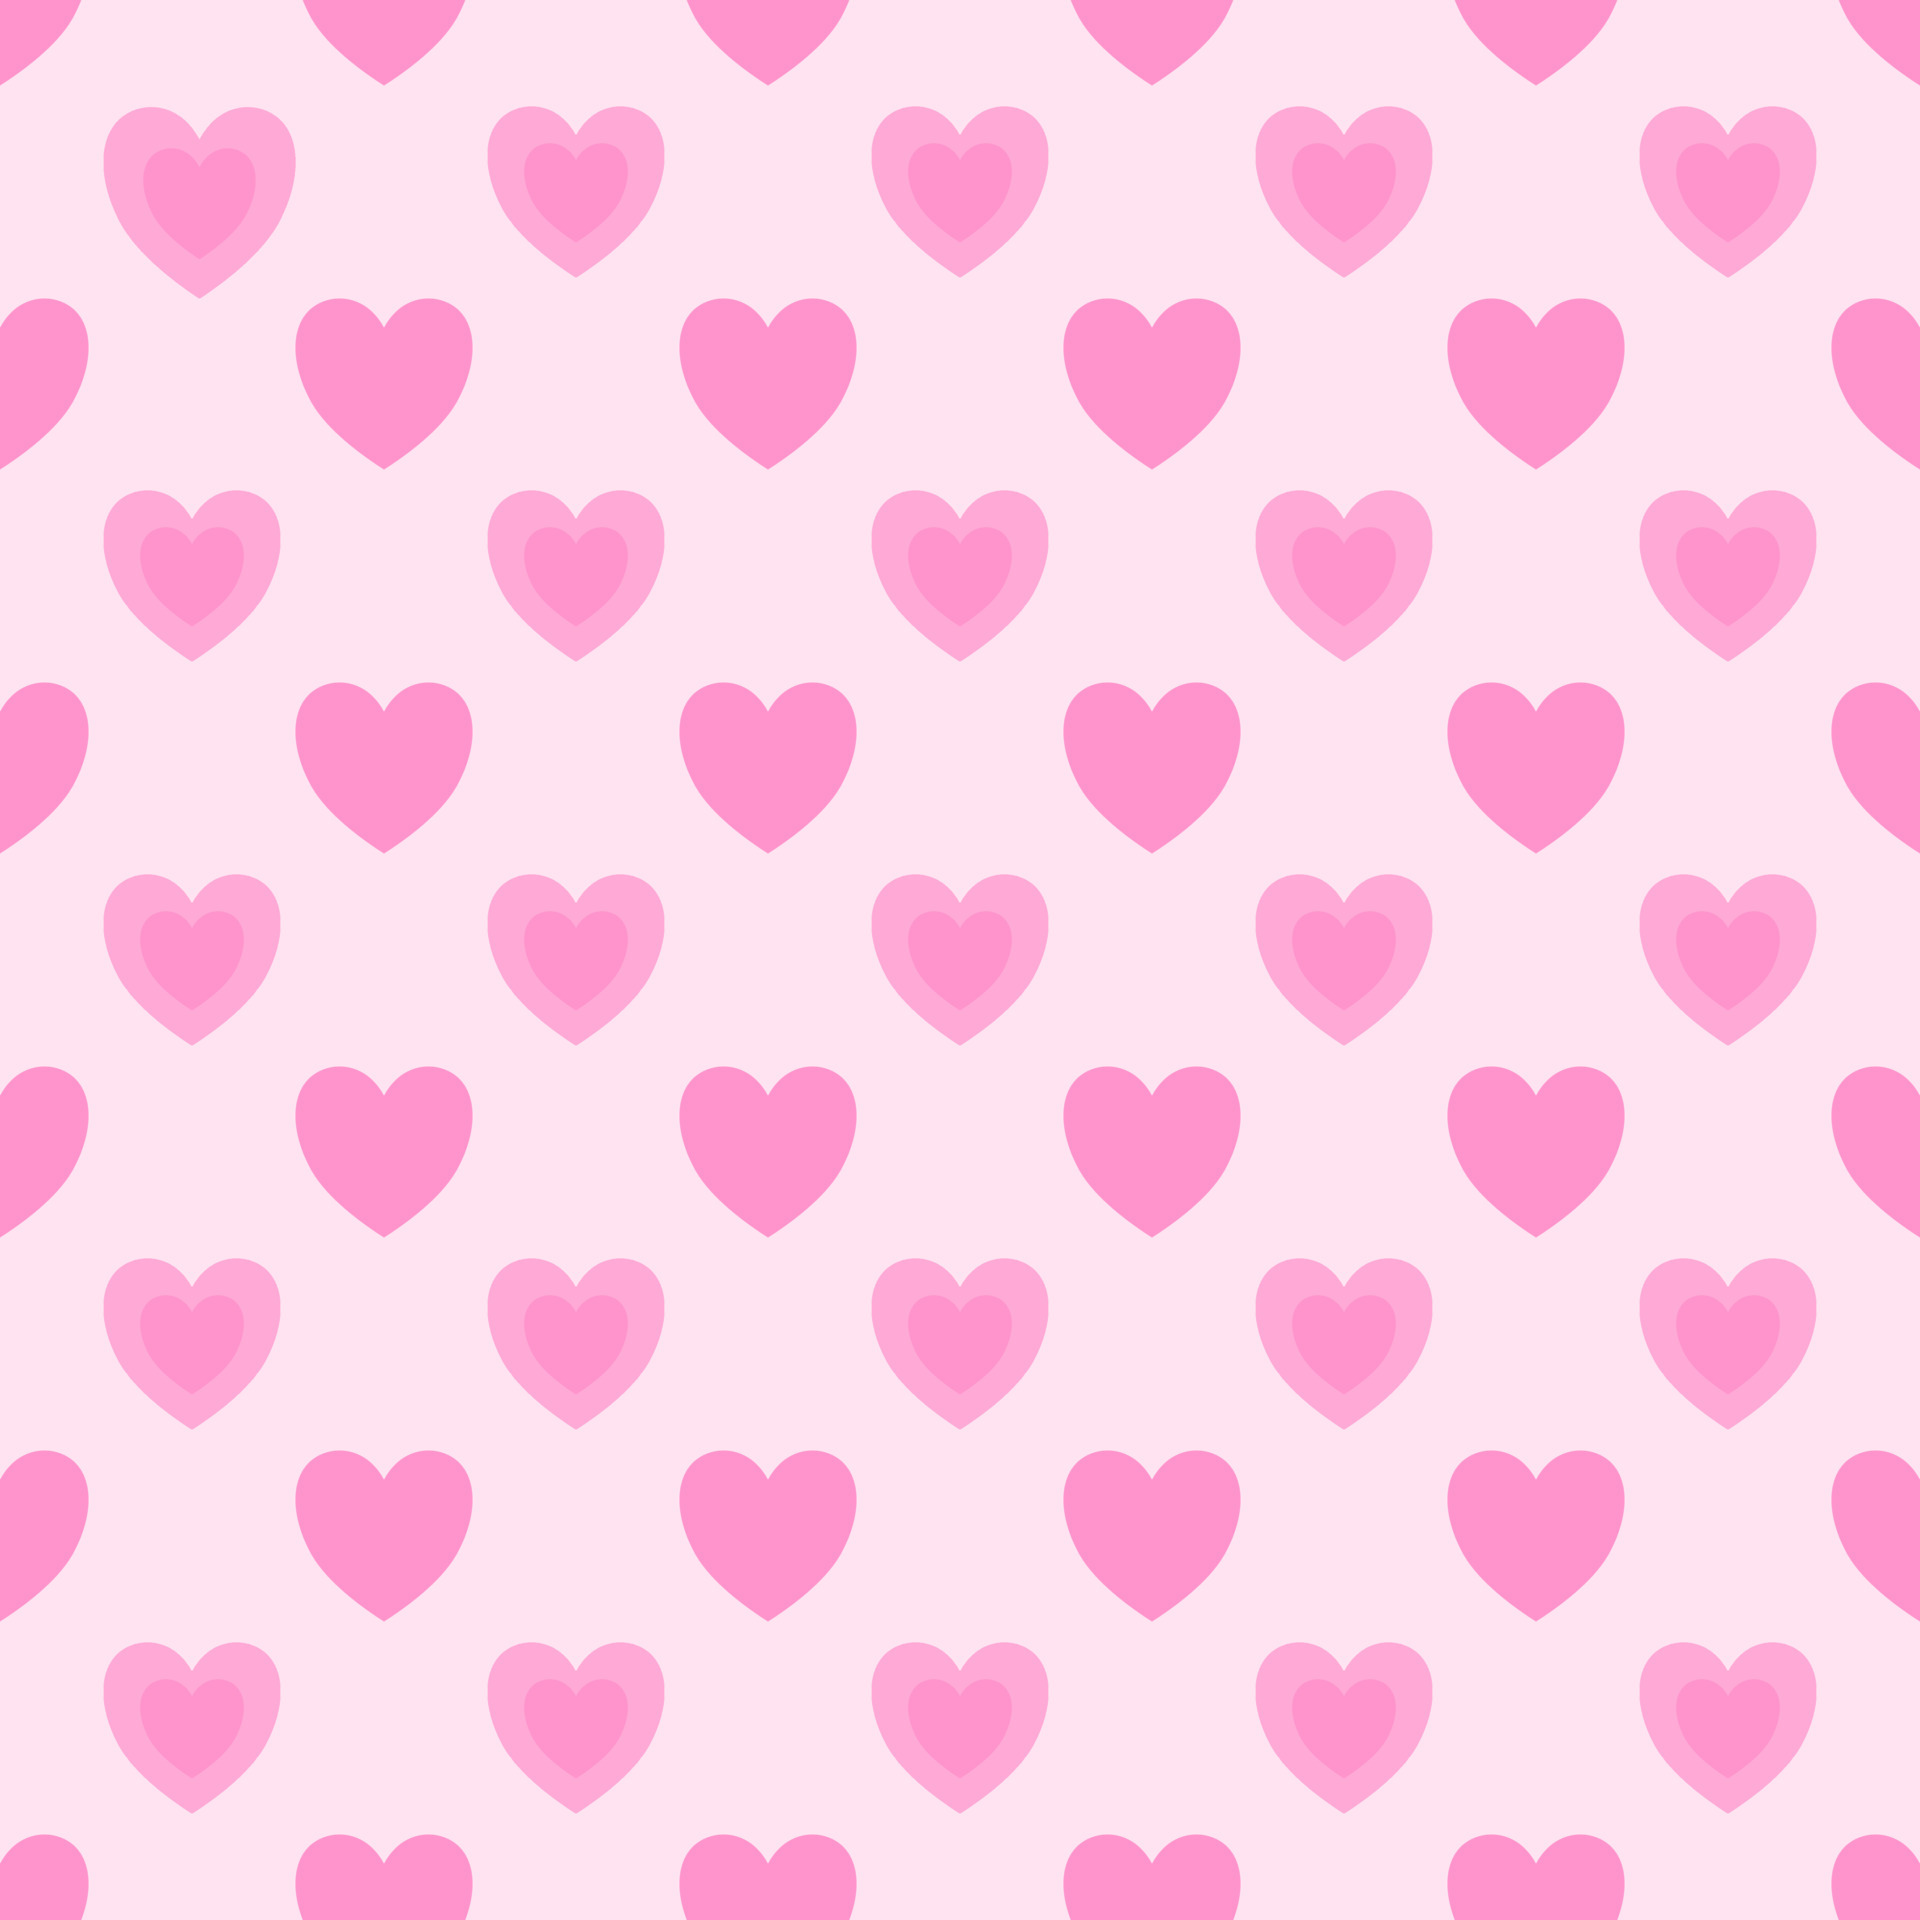 A Bright Pink Background With A Pink Heart Makes Up The Heart Seamless Design Vector Art At Vecteezy